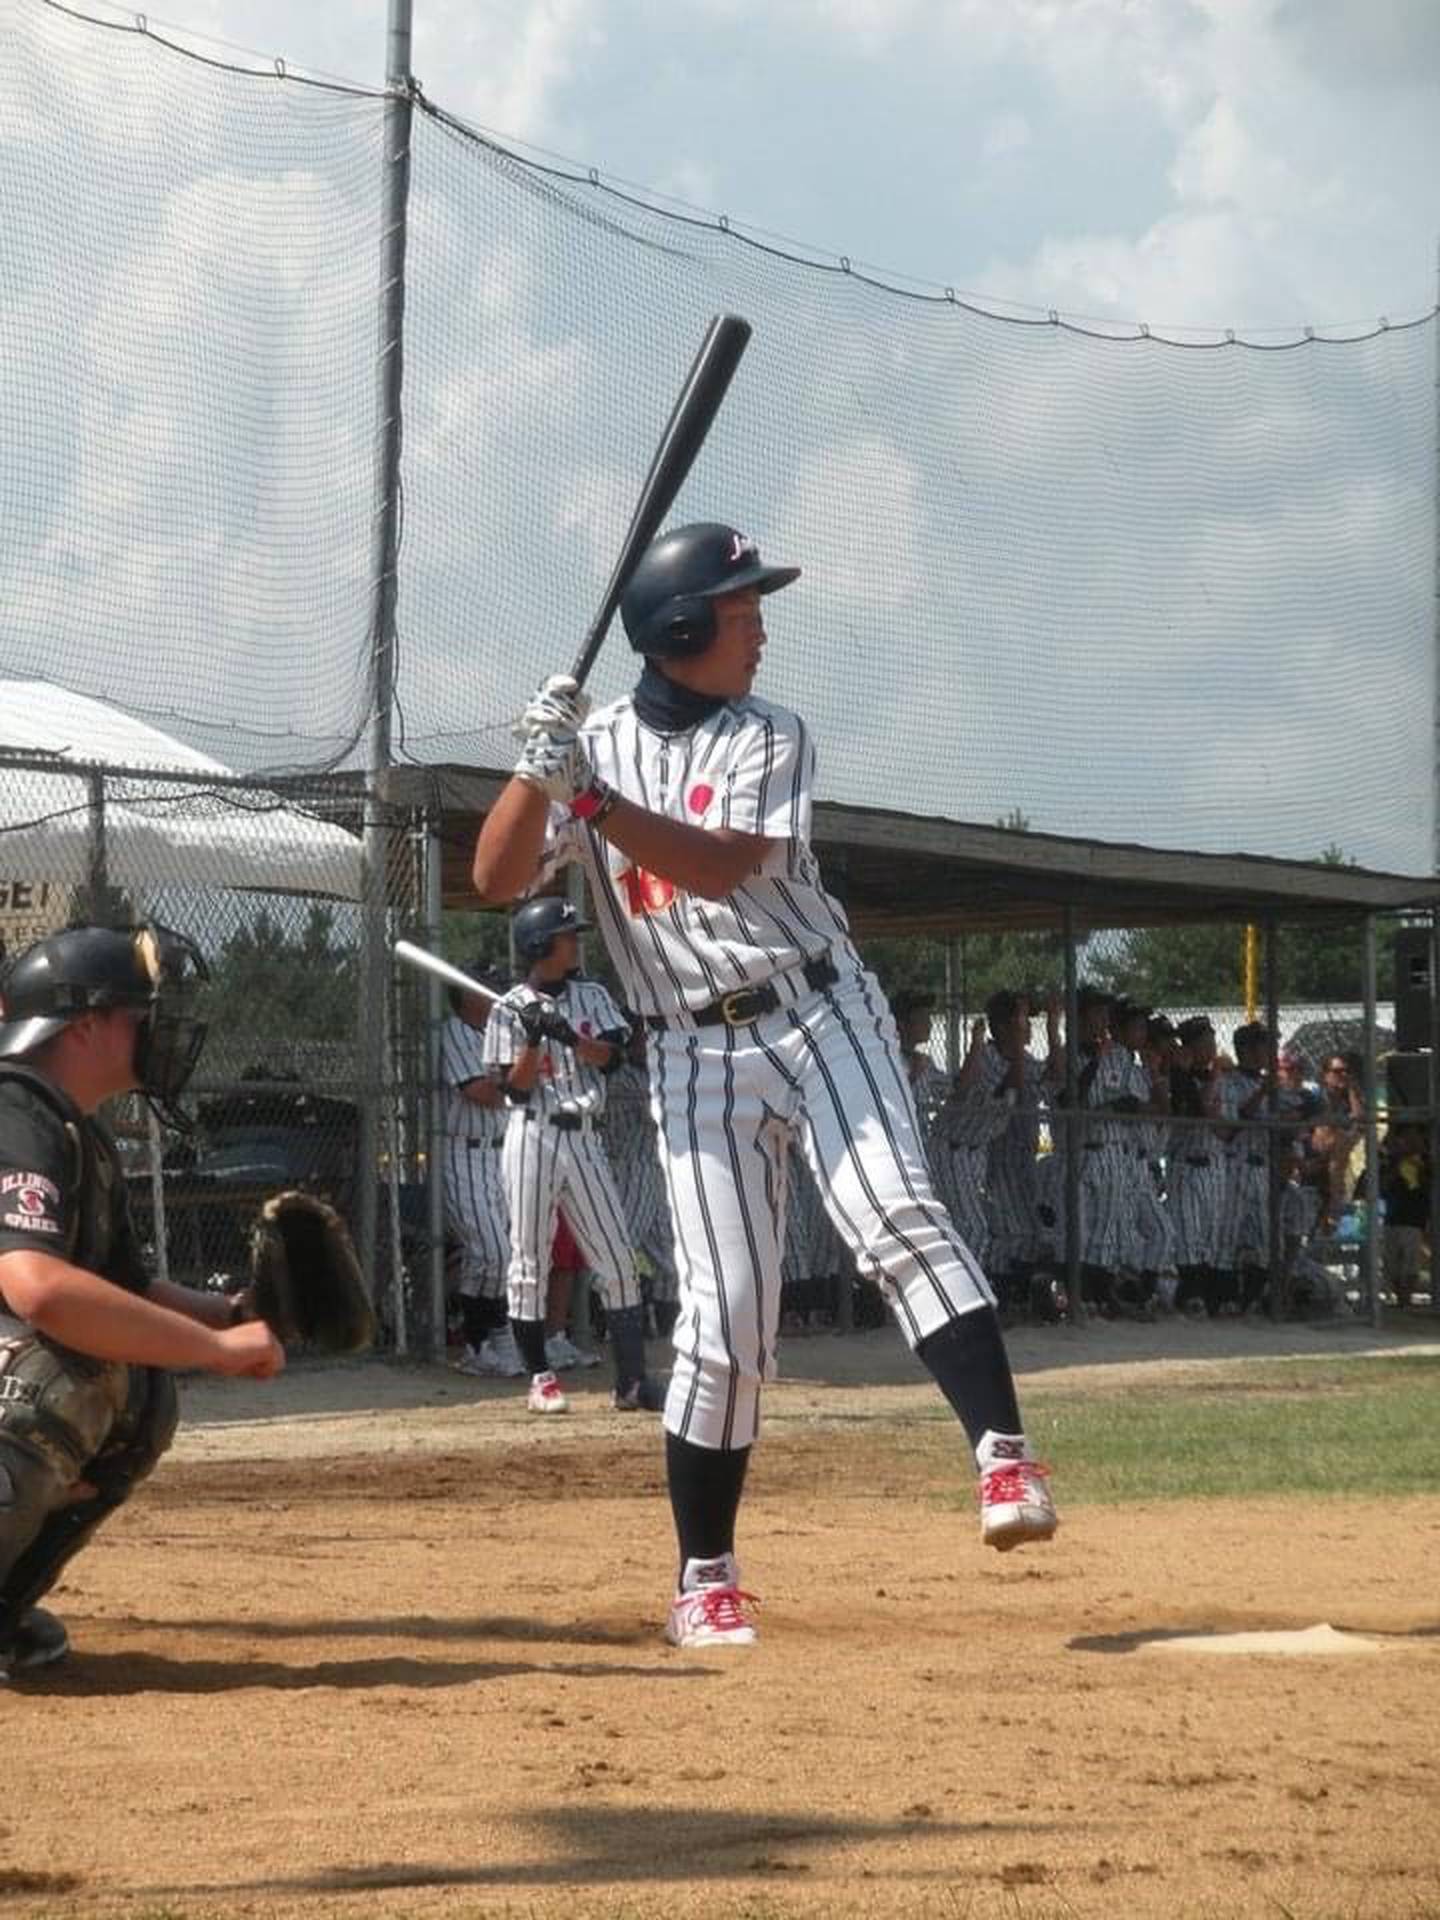 Kazuma Okamoto at bat during the 2011 McHenry County Youth Sports Summer International Baseball Tournament at Lippold Park in Crystal Lake. Okamoto played for Japan during the 2023 World Baseball Classic. Photo Courtesy of Todd O'Connor